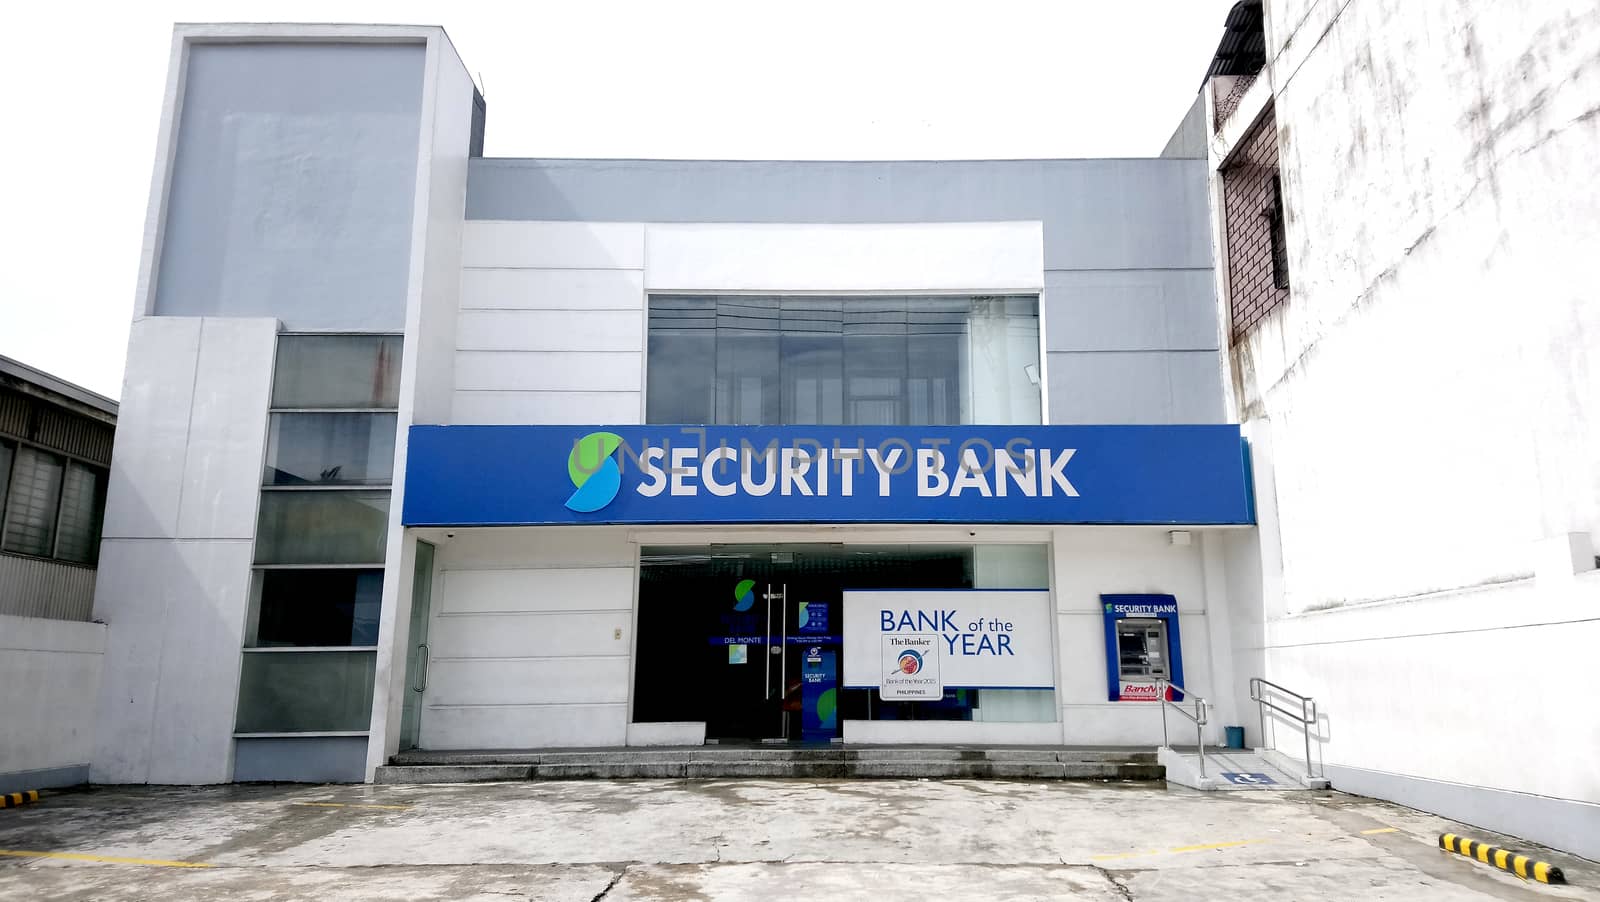 Security bank facade in Quezon City, Philippines by imwaltersy